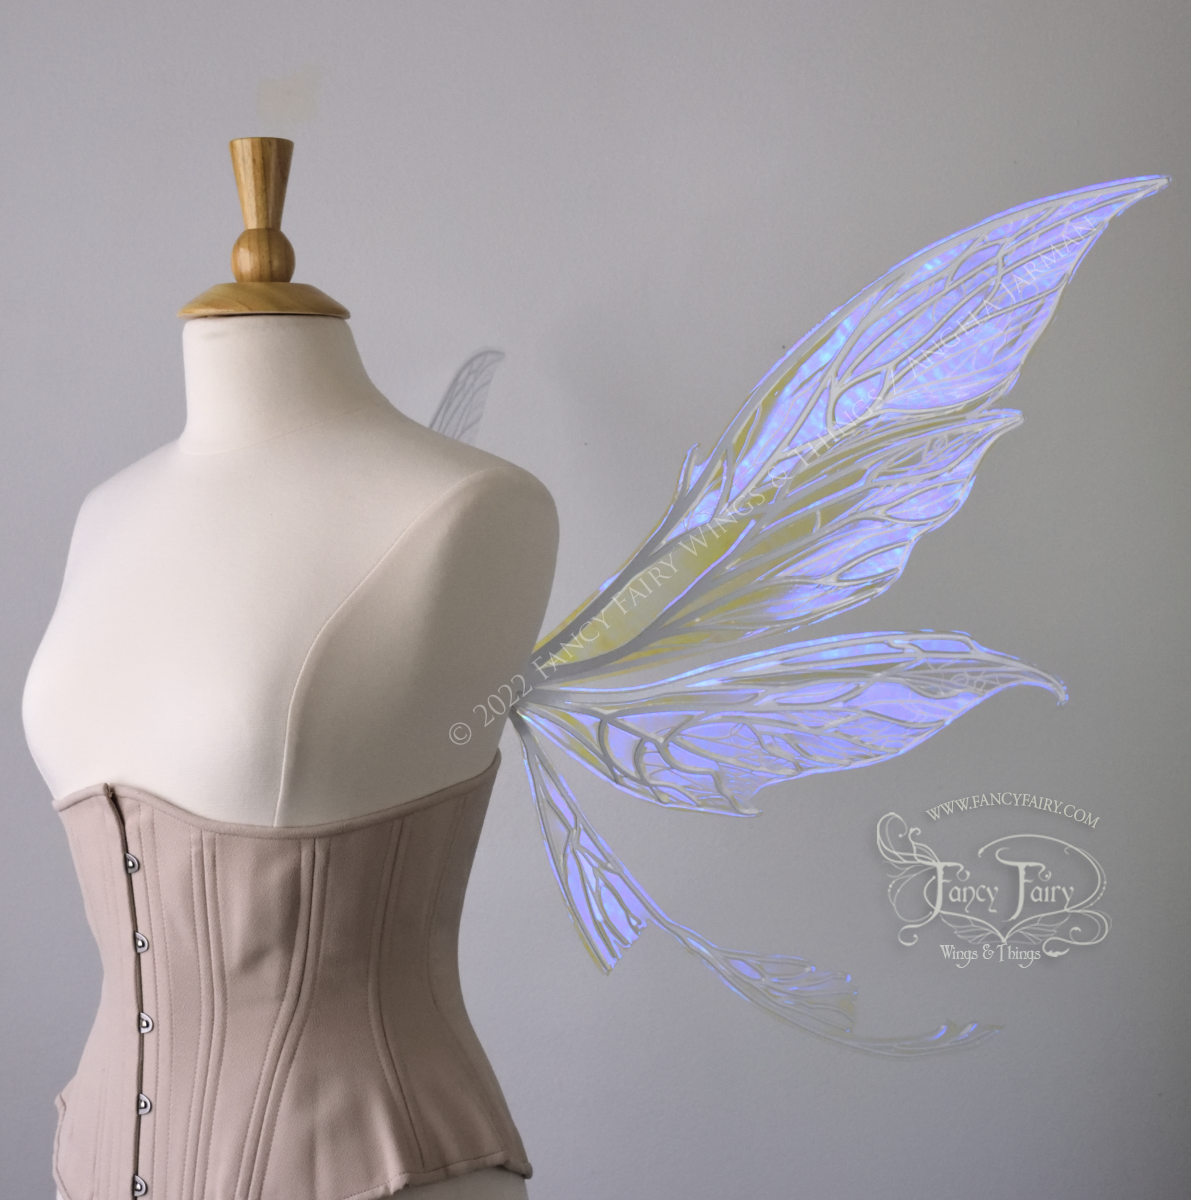 Colette Convertible Iridescent "Pix" Fairy Wings in Ultraviolet with white veins